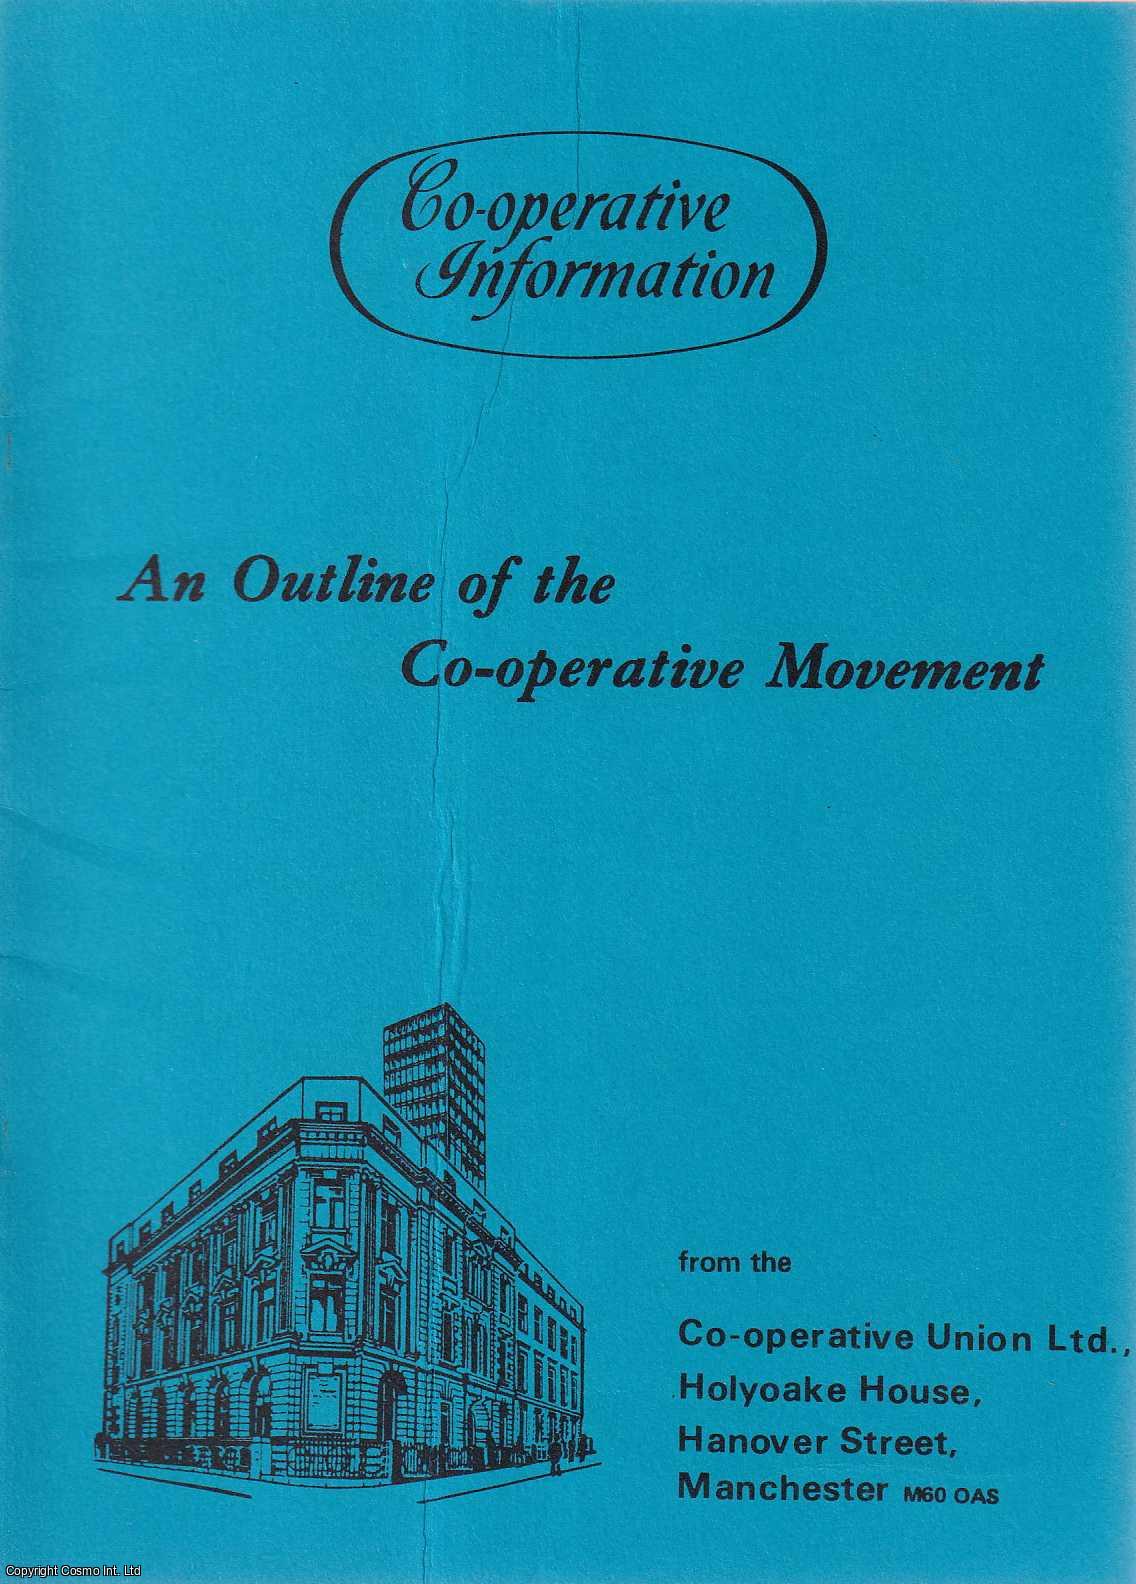 Co-operative Union - An Outline of the Co-operative Movement.